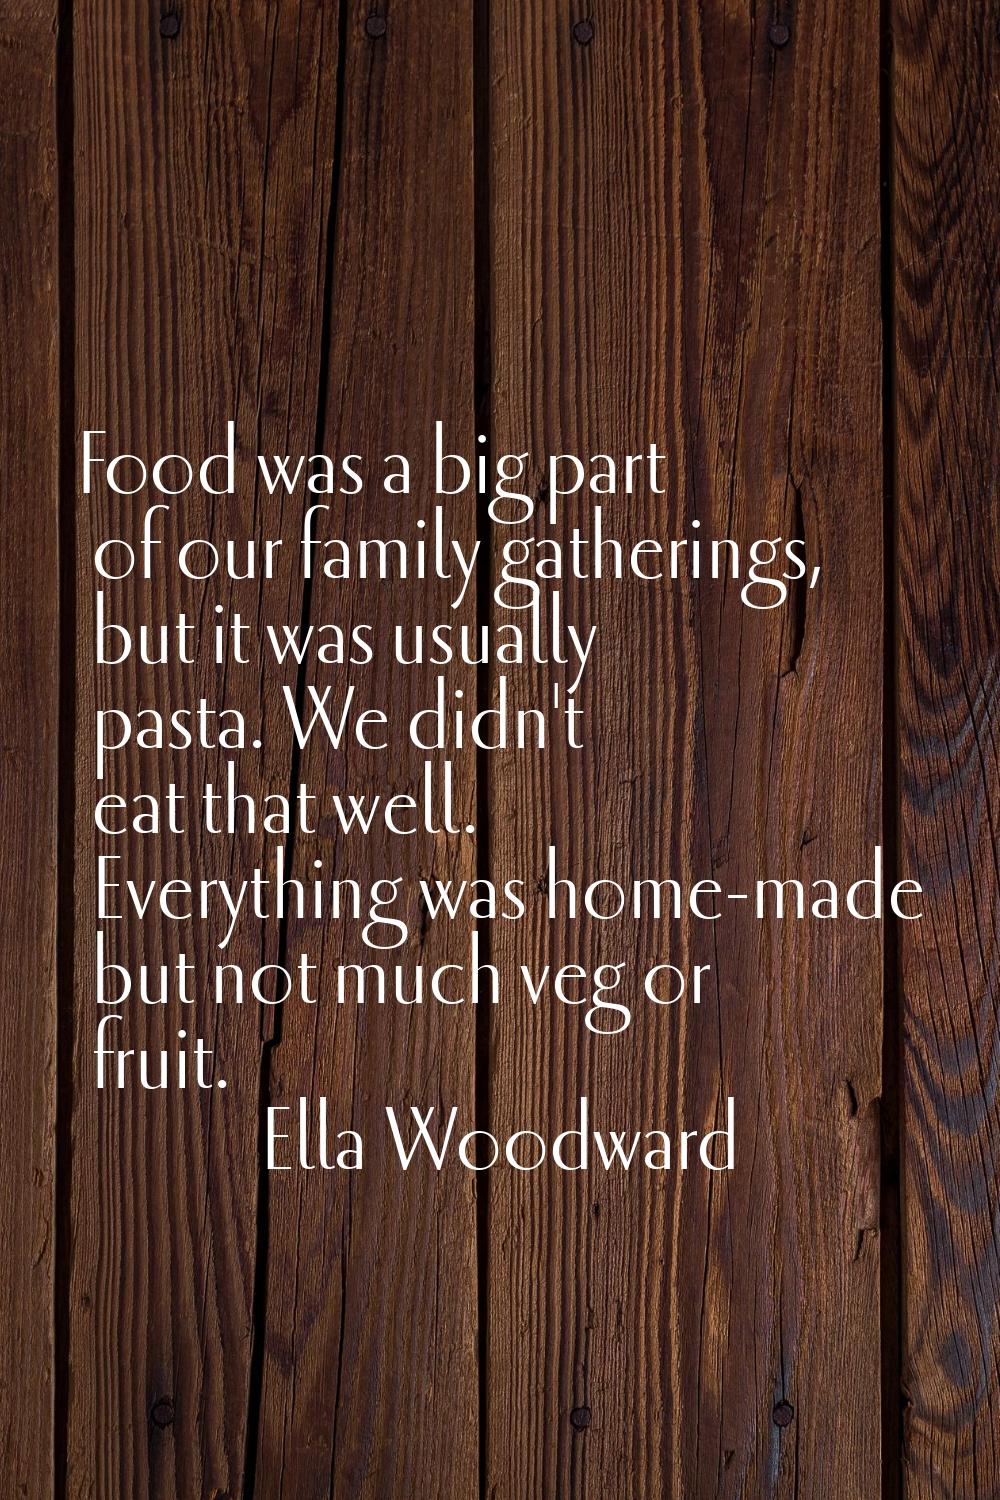 Food was a big part of our family gatherings, but it was usually pasta. We didn't eat that well. Ev